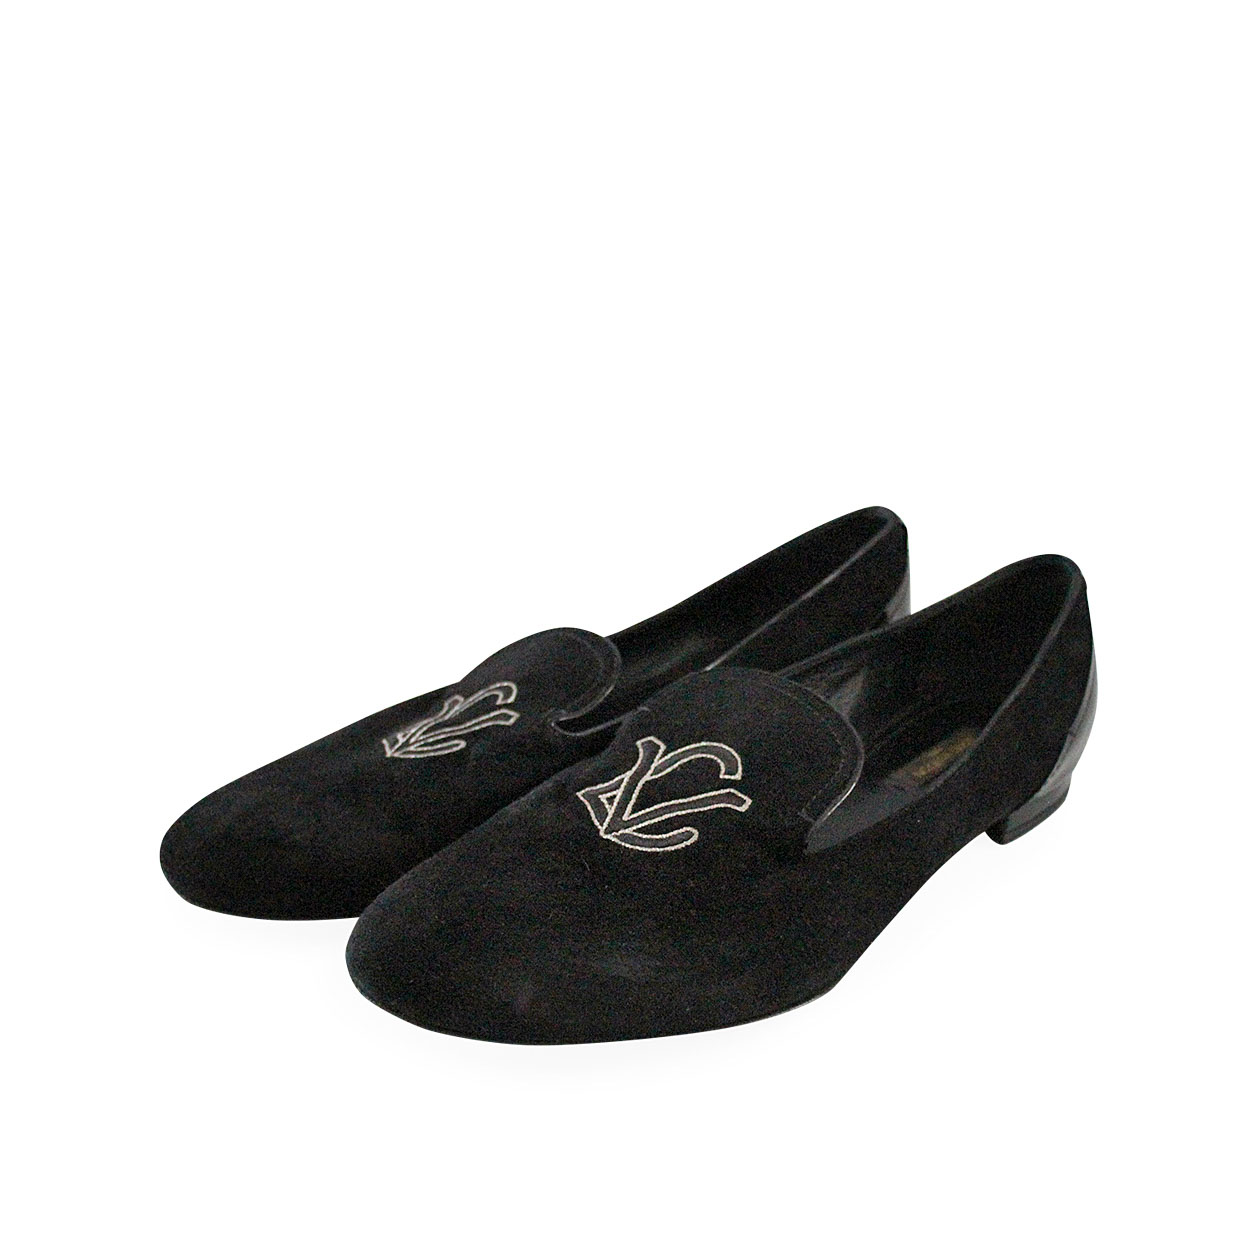 LOUIS VUITTON Suede/Patent Logo Embroidered Loafers Black - S: 38.5 (5. ...